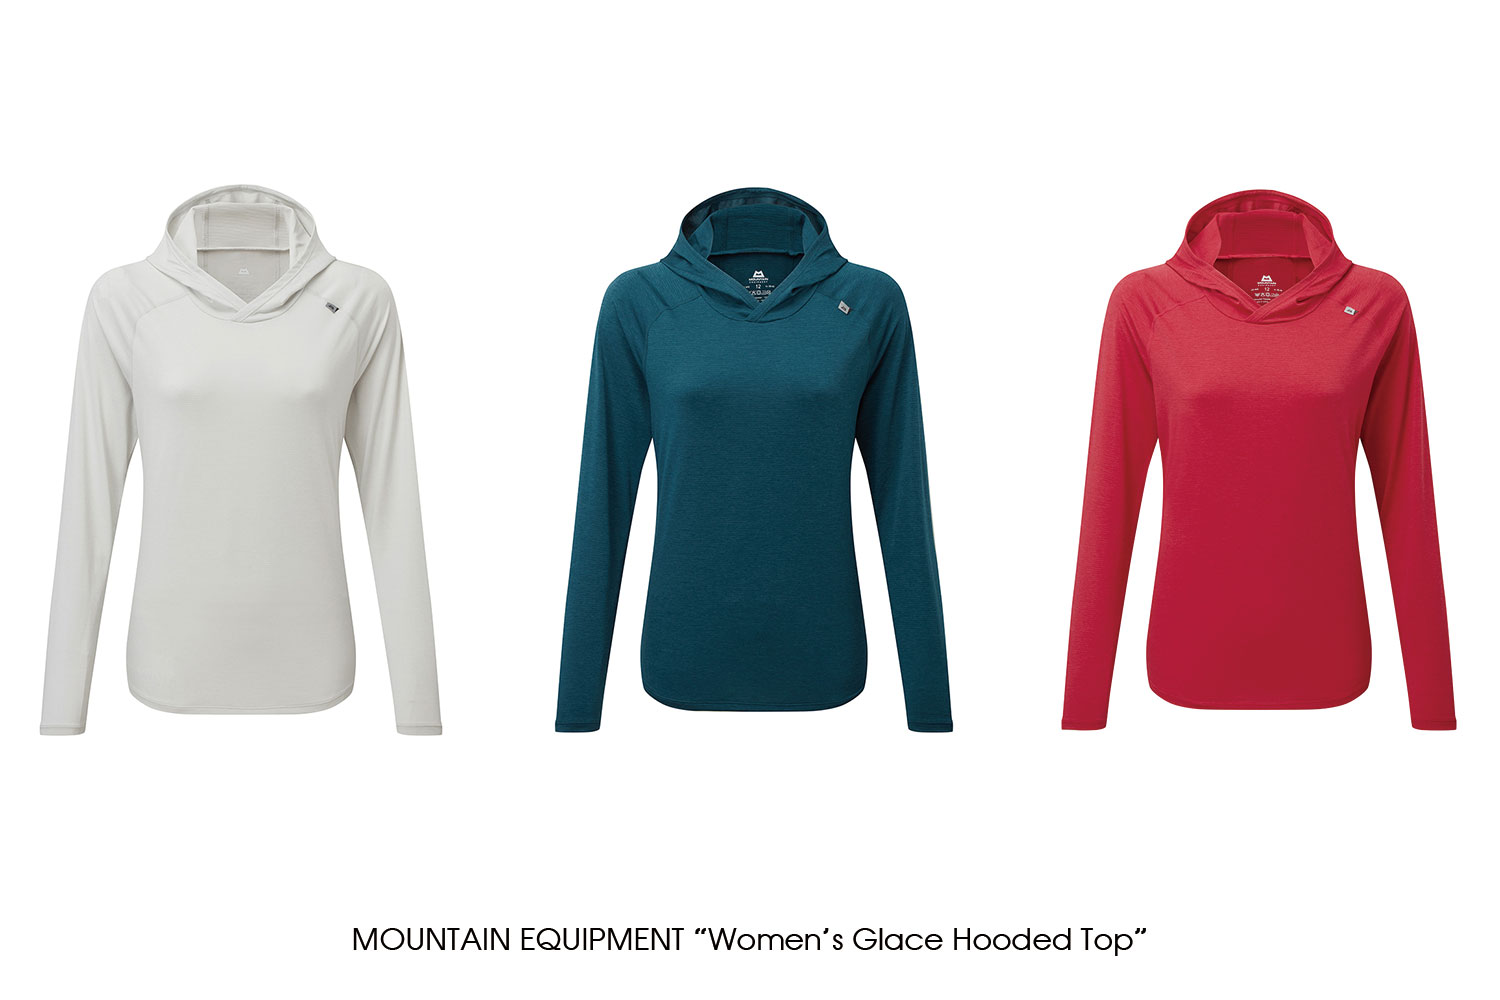 MOUNTAIN EQUIPMENT "Women's Glace Hooded Top"